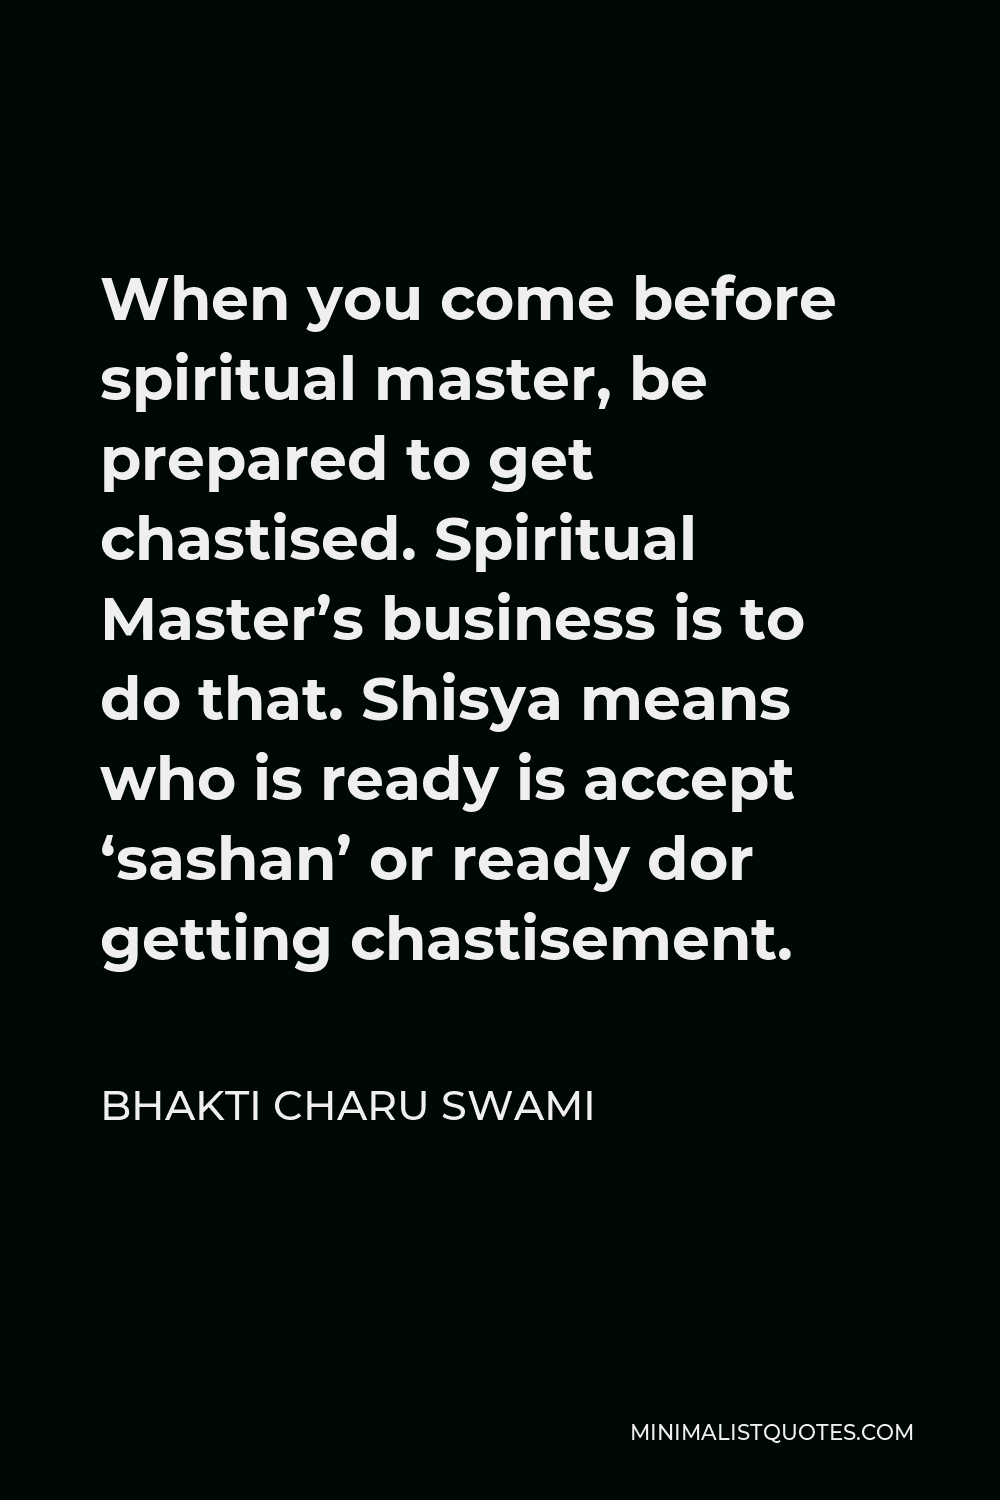 Bhakti Charu Swami Quote - When you come before spiritual master, be prepared to get chastised. Spiritual Master’s business is to do that. Shisya means who is ready is accept ‘sashan’ or ready dor getting chastisement.